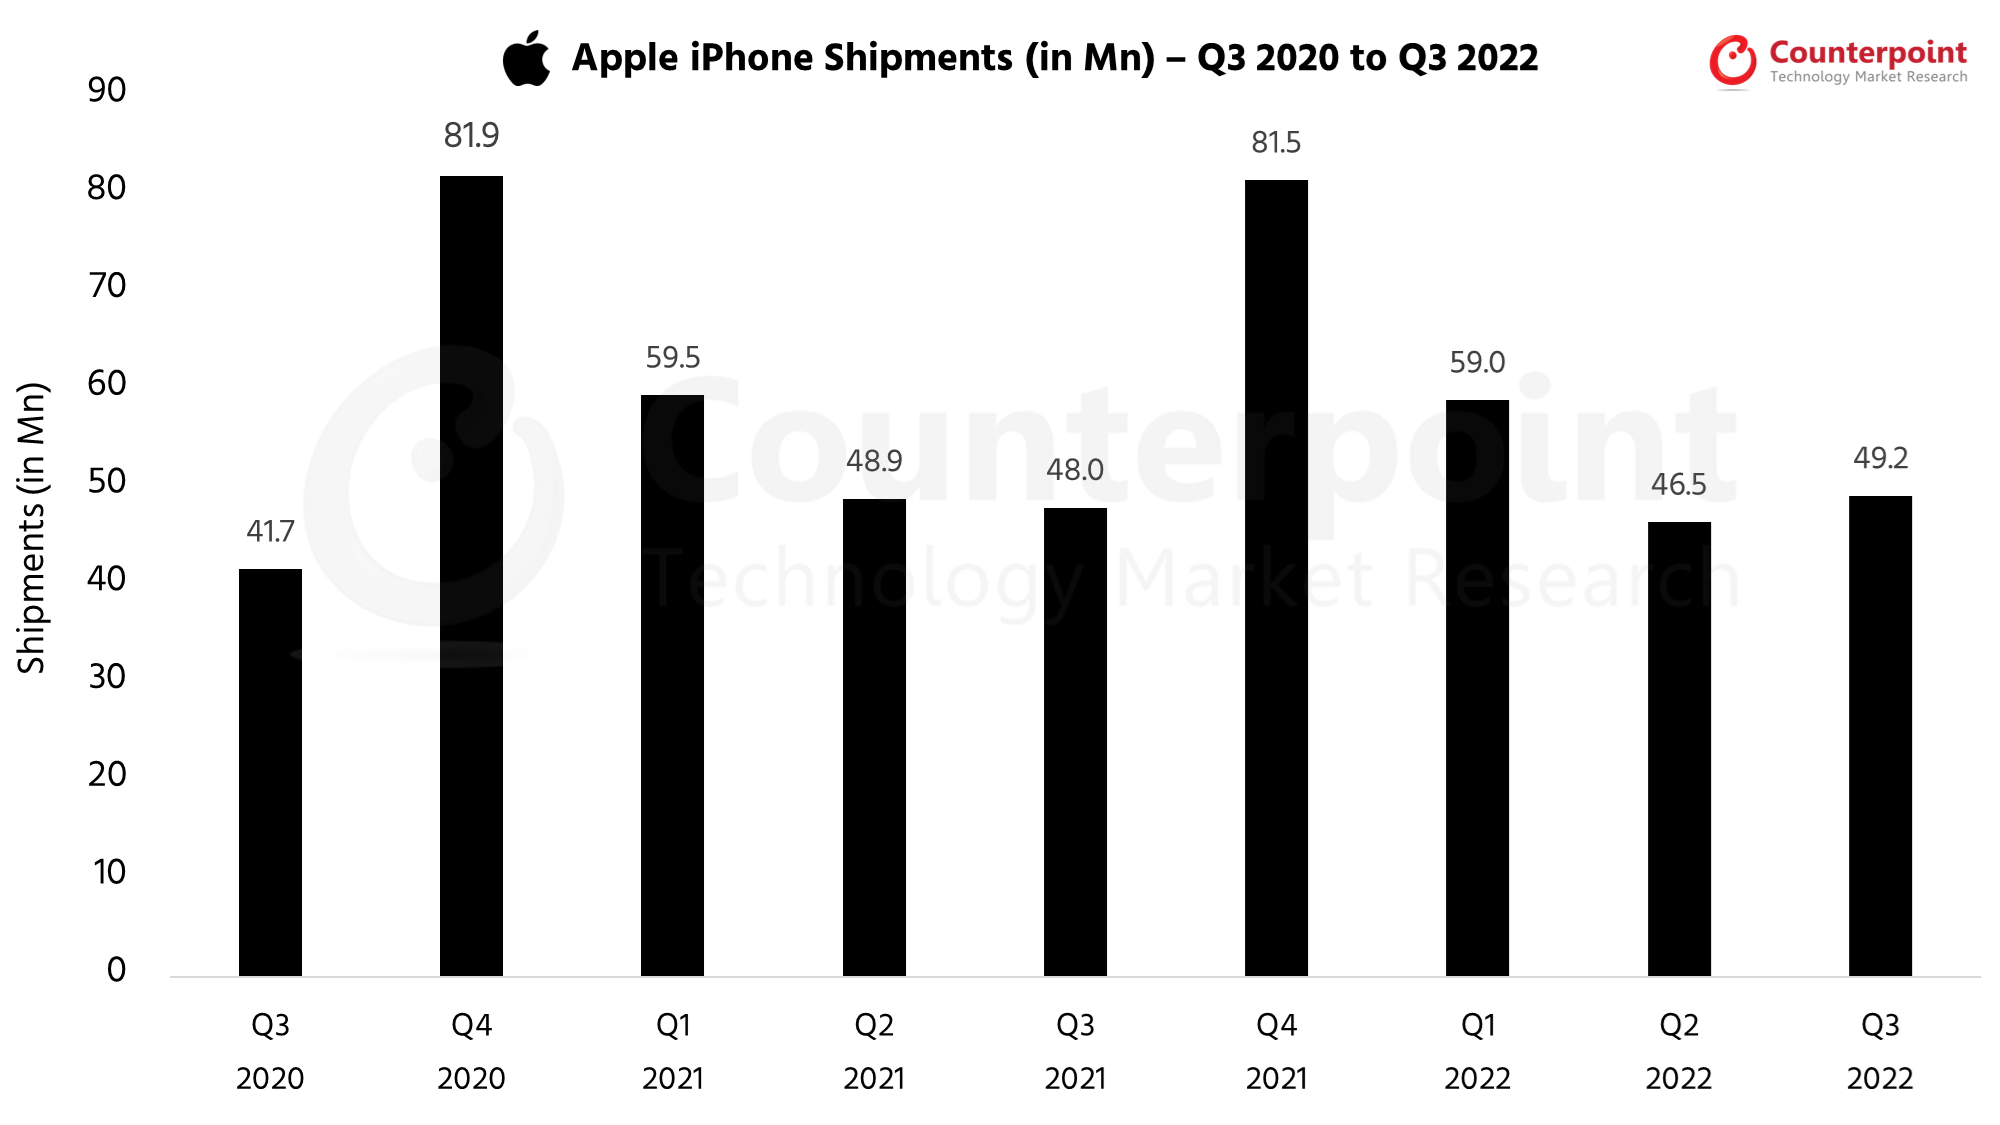 Apple iPhone Market Share: By Quarter